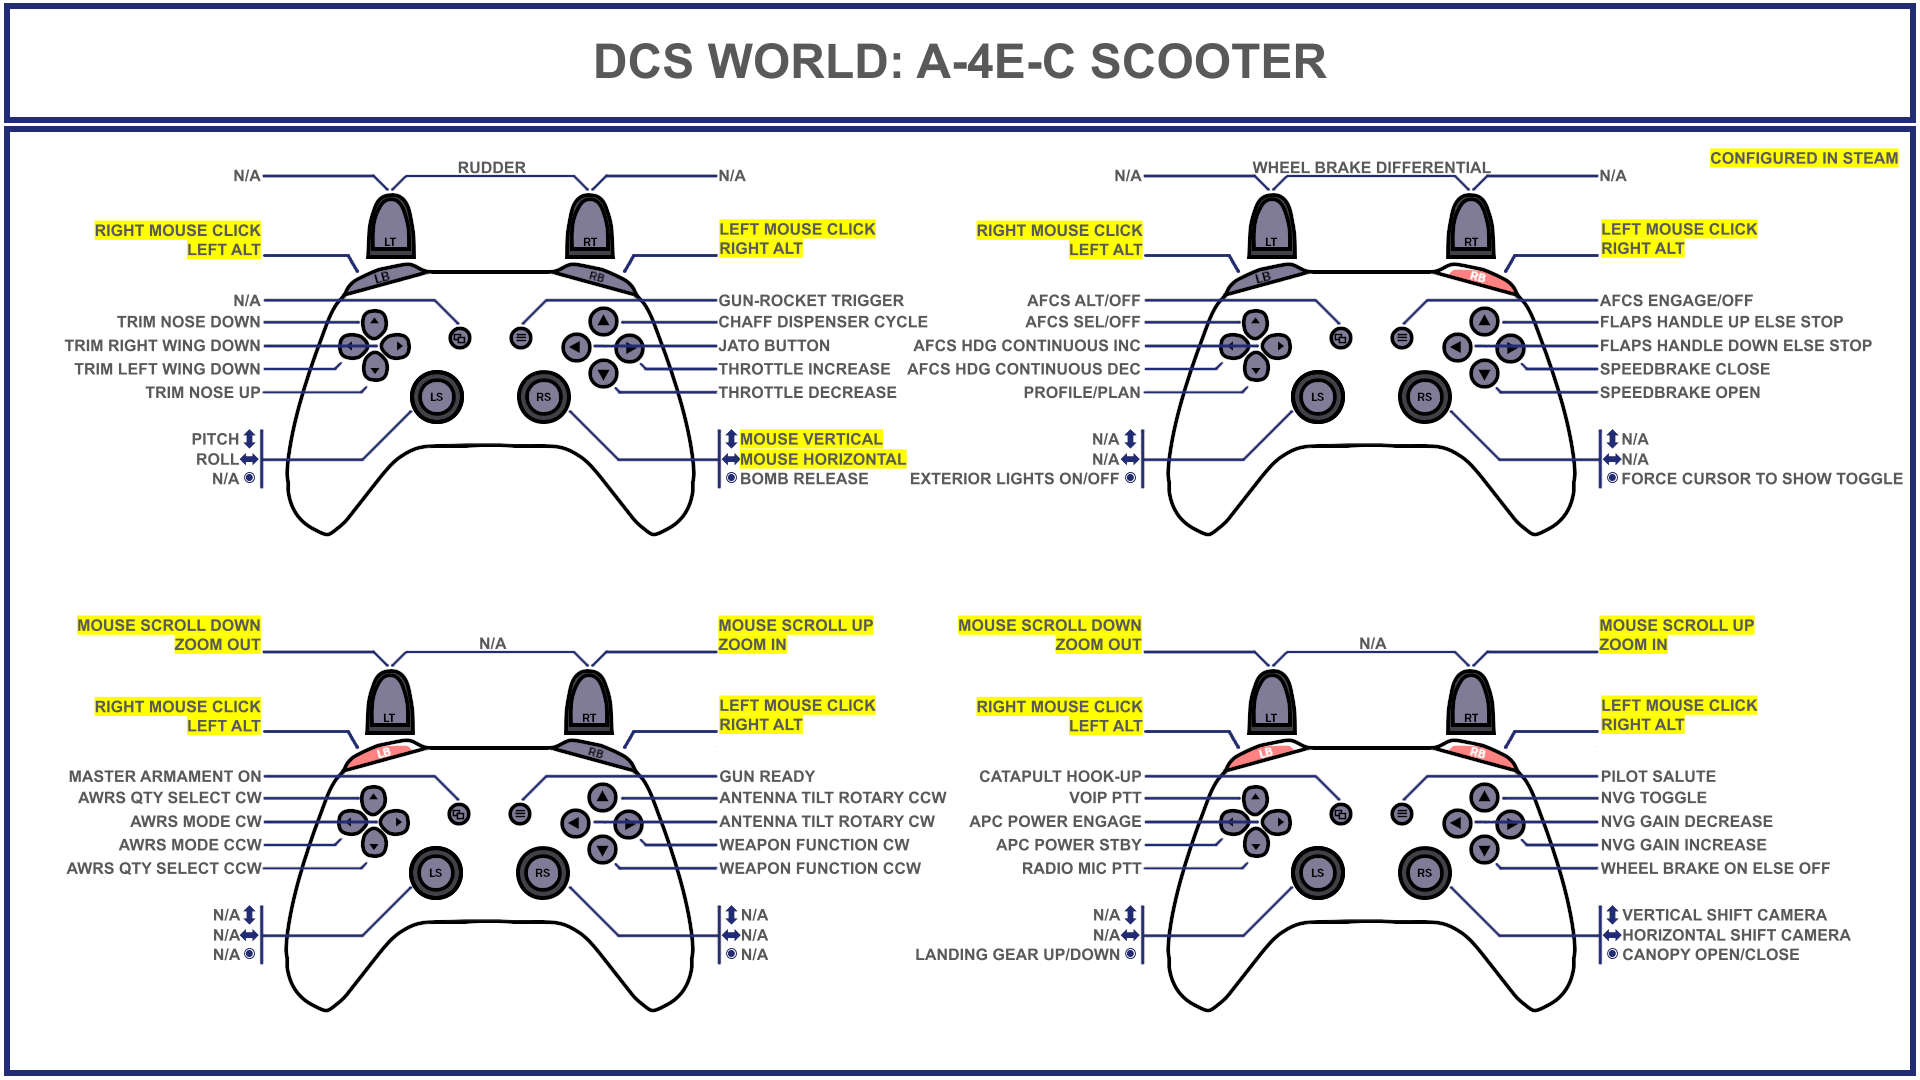 Tuuvas' Official A-4E-C Scooter Gamepad Controller Layout